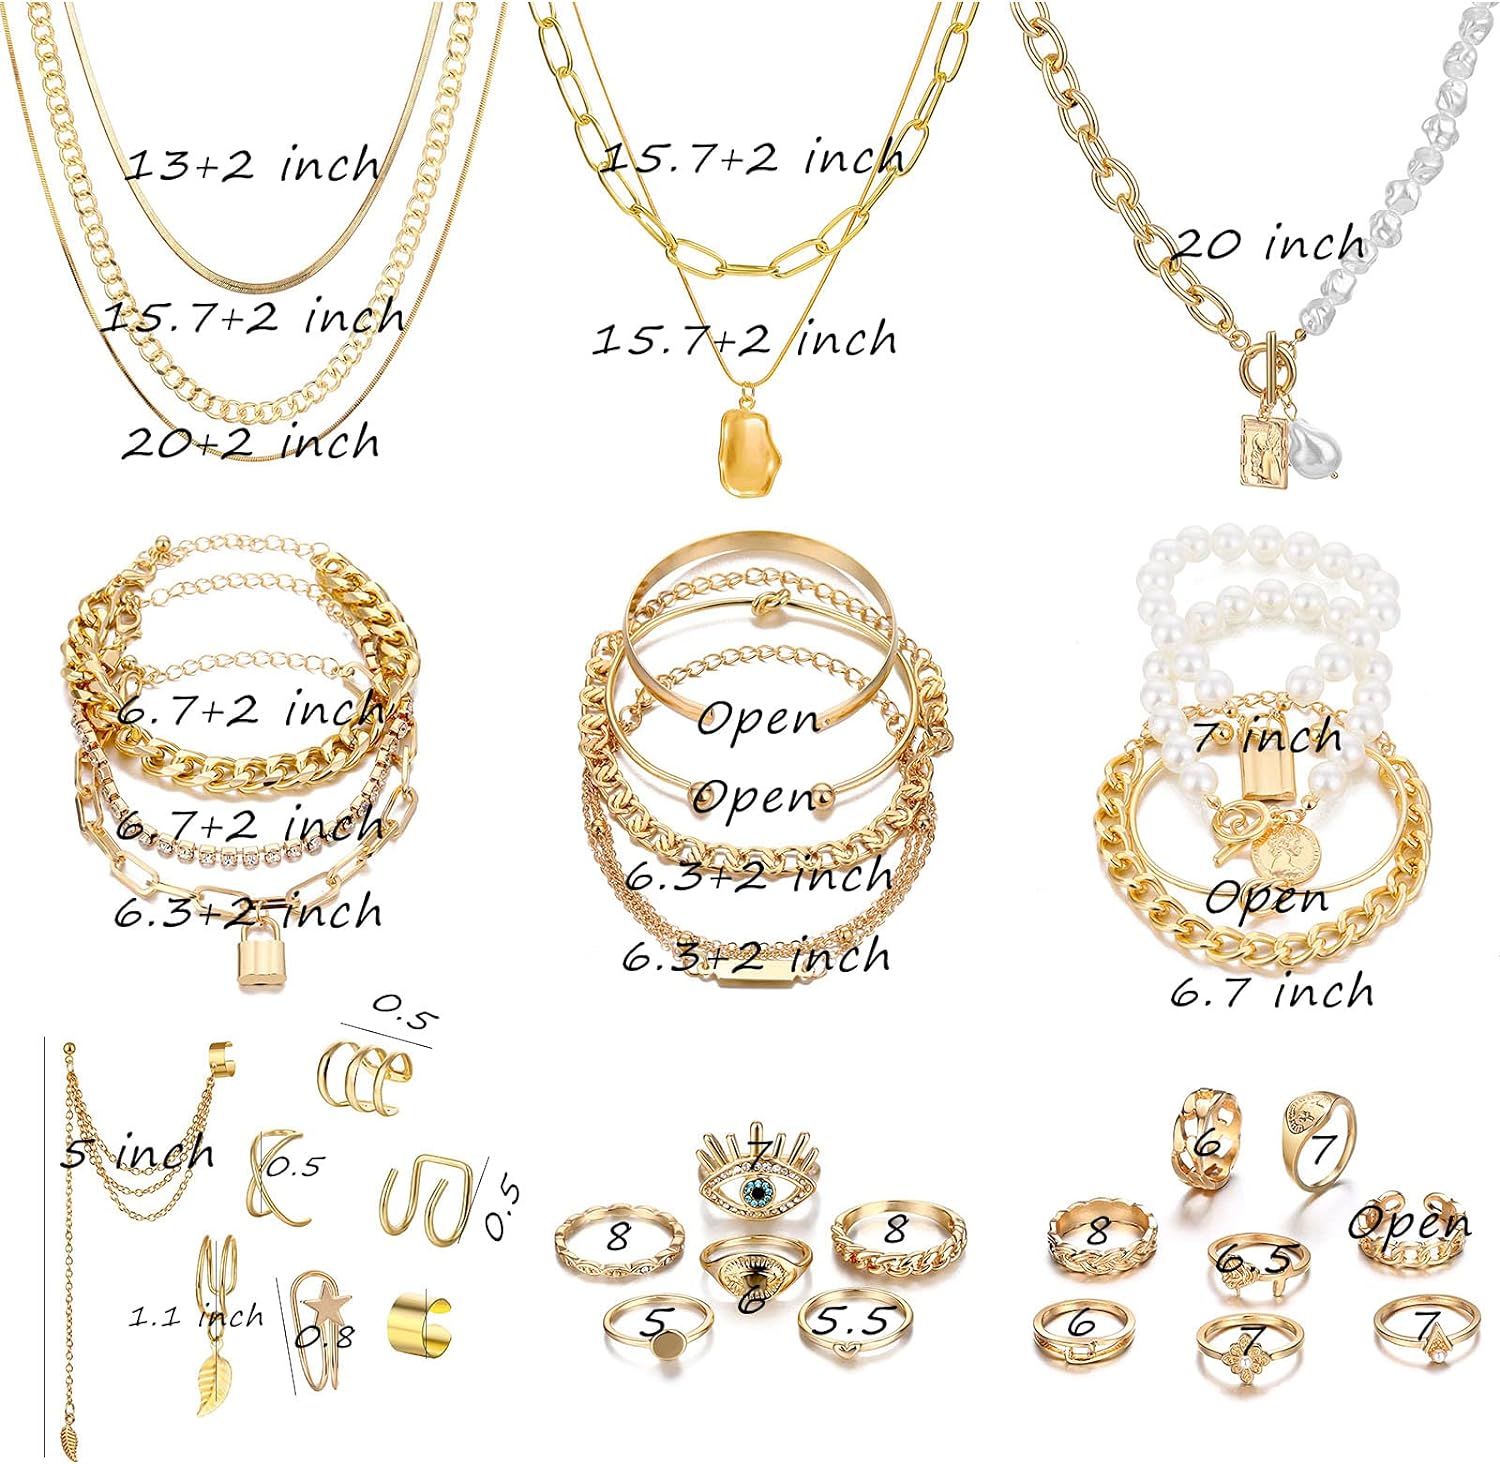 IFKM 36 PCS Gold Plated Jewelry Set with 4 PCS Necklace, 11 PCS Bracelet, 7 PCS Ear Cuffs Earring, 14 Pcs Knuckle Rings for Women Girls Valentine Anniversary Birthday Friendship Gift